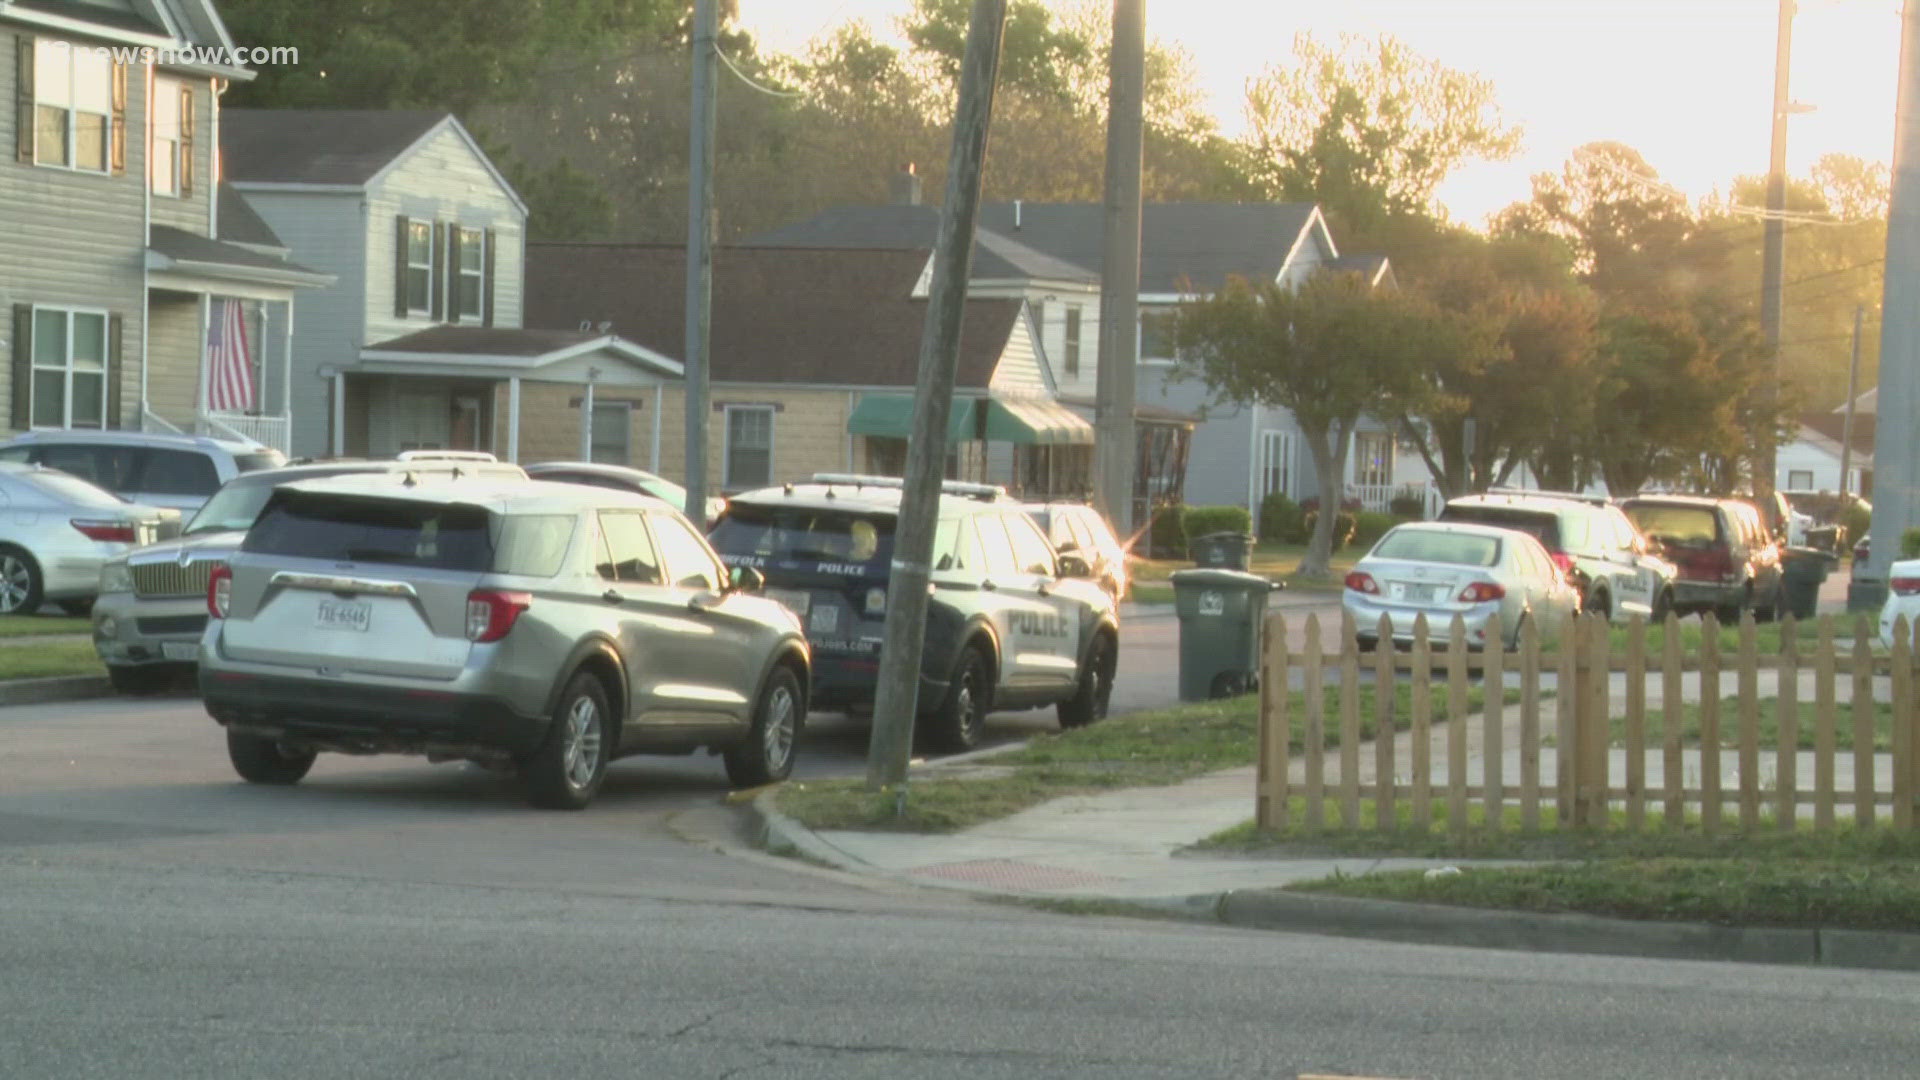 The Norfolk Police Department said officers responded to a home in the 900 block of Avenue F for a report of a gunshot victim.